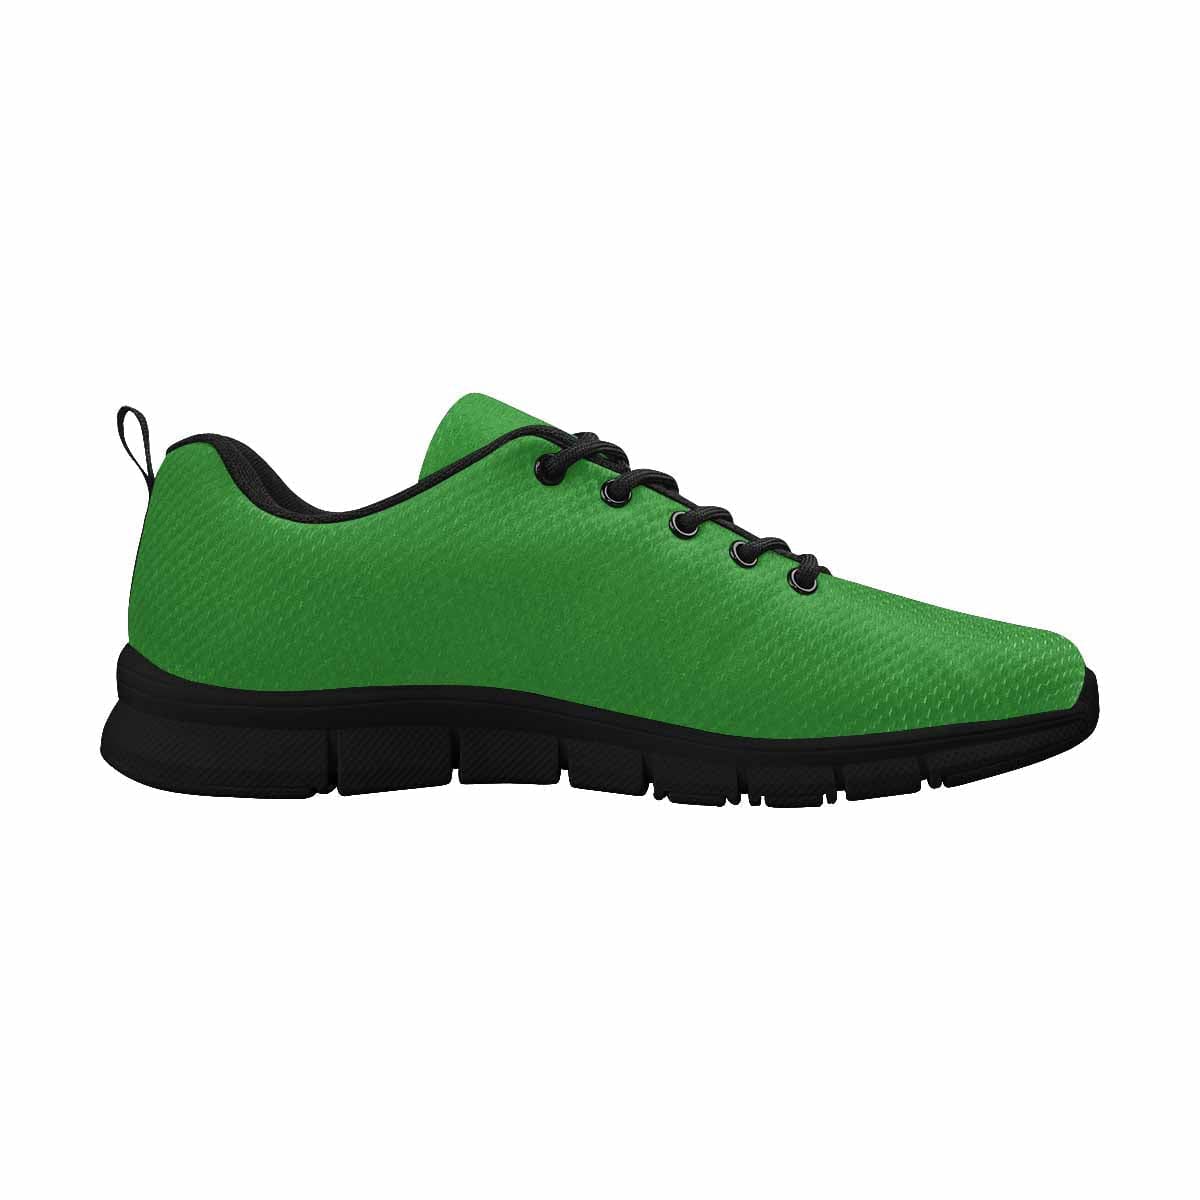 Sneakers For Men Forest Green - Canvas Mesh Athletic Running Shoes - Mens